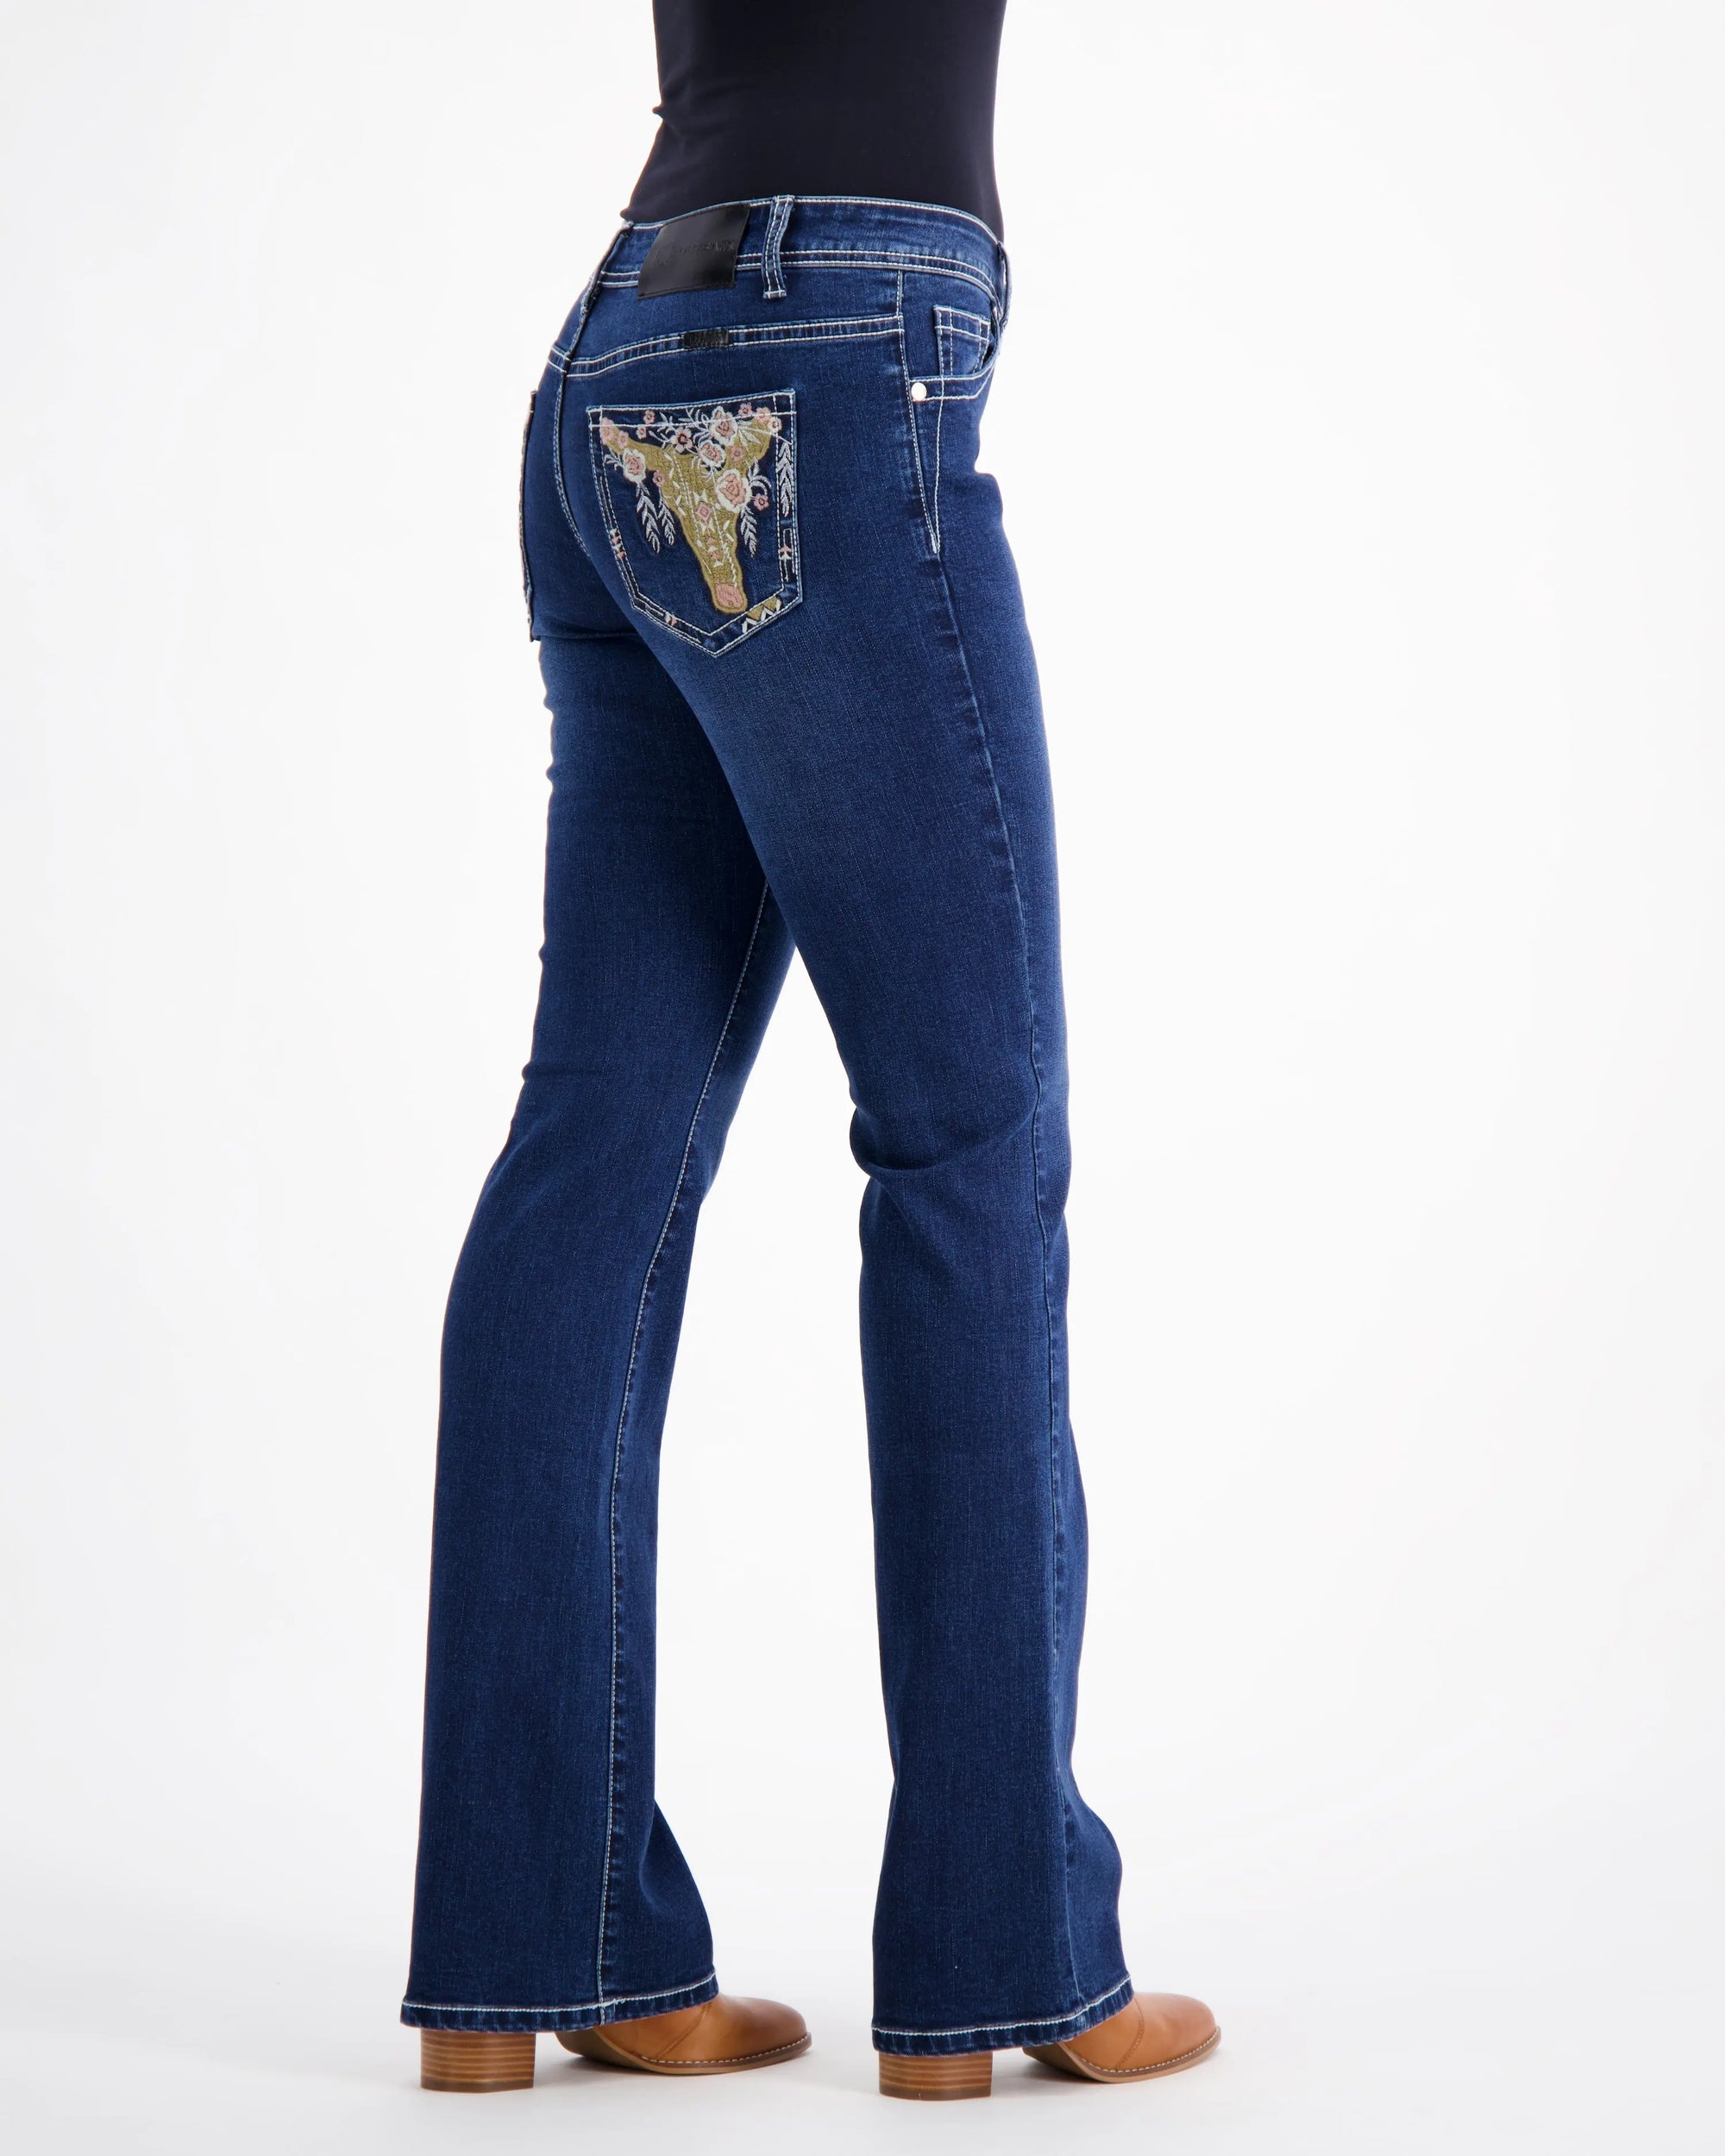 Stretch Denim jeans with embroidered pockets